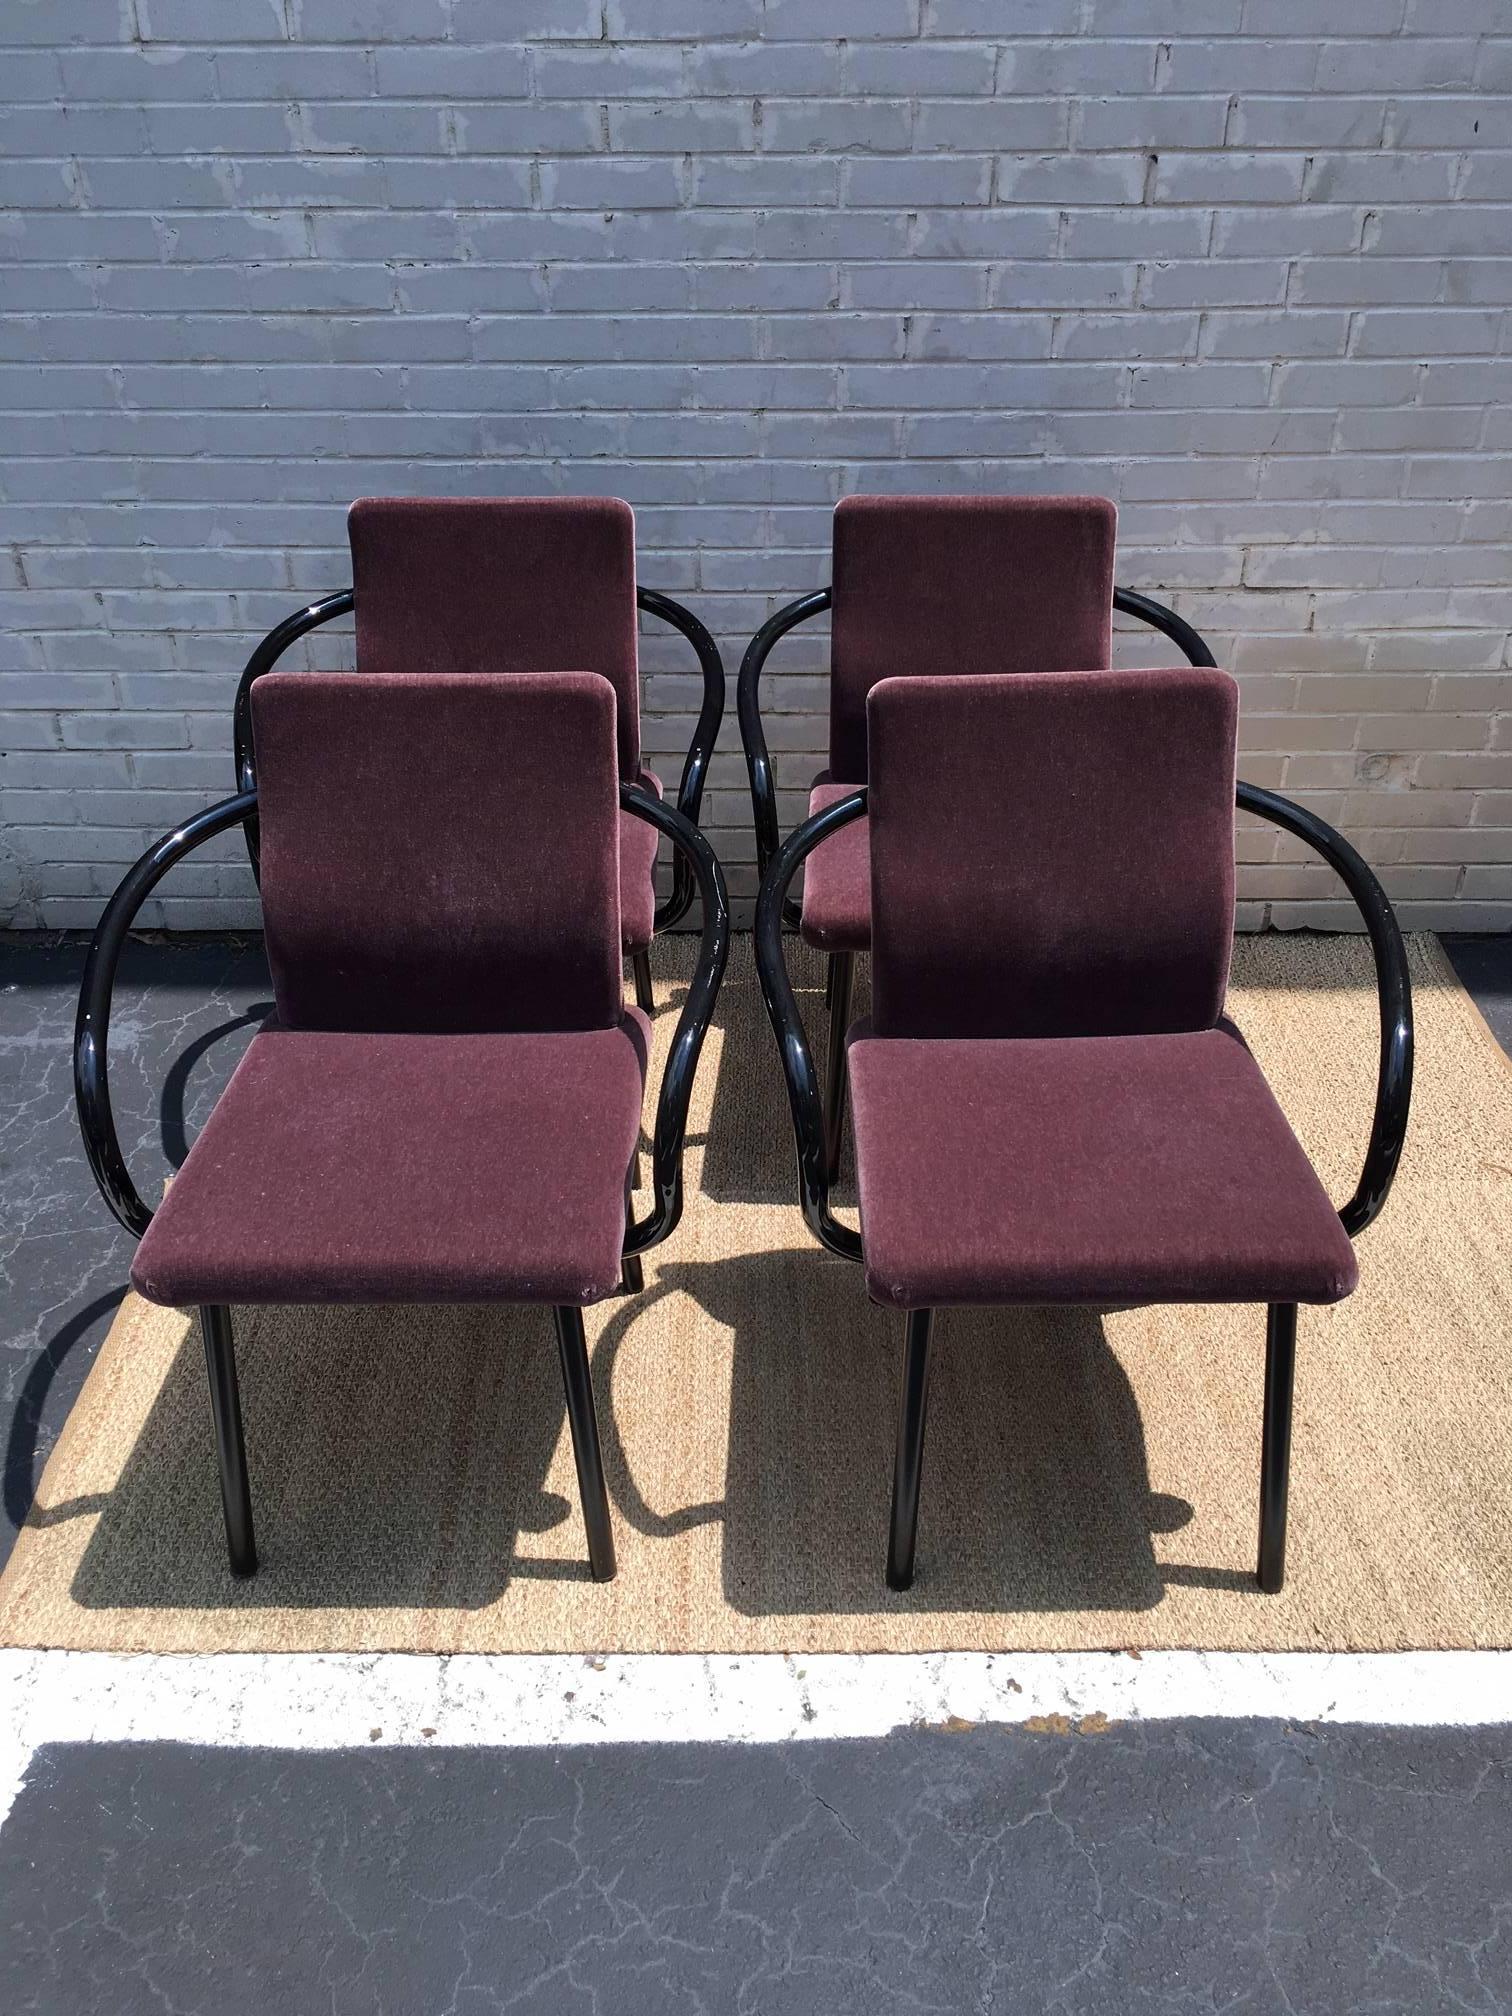 Beautiful set of eight matching Mandarin armchairs designed by Ettore Sottsass for Knoll International. This set was custom ordered in Knoll Plum Mohair fabric which really gives them a classy Art Deco feel. The arms and legs are black metal. Mohair